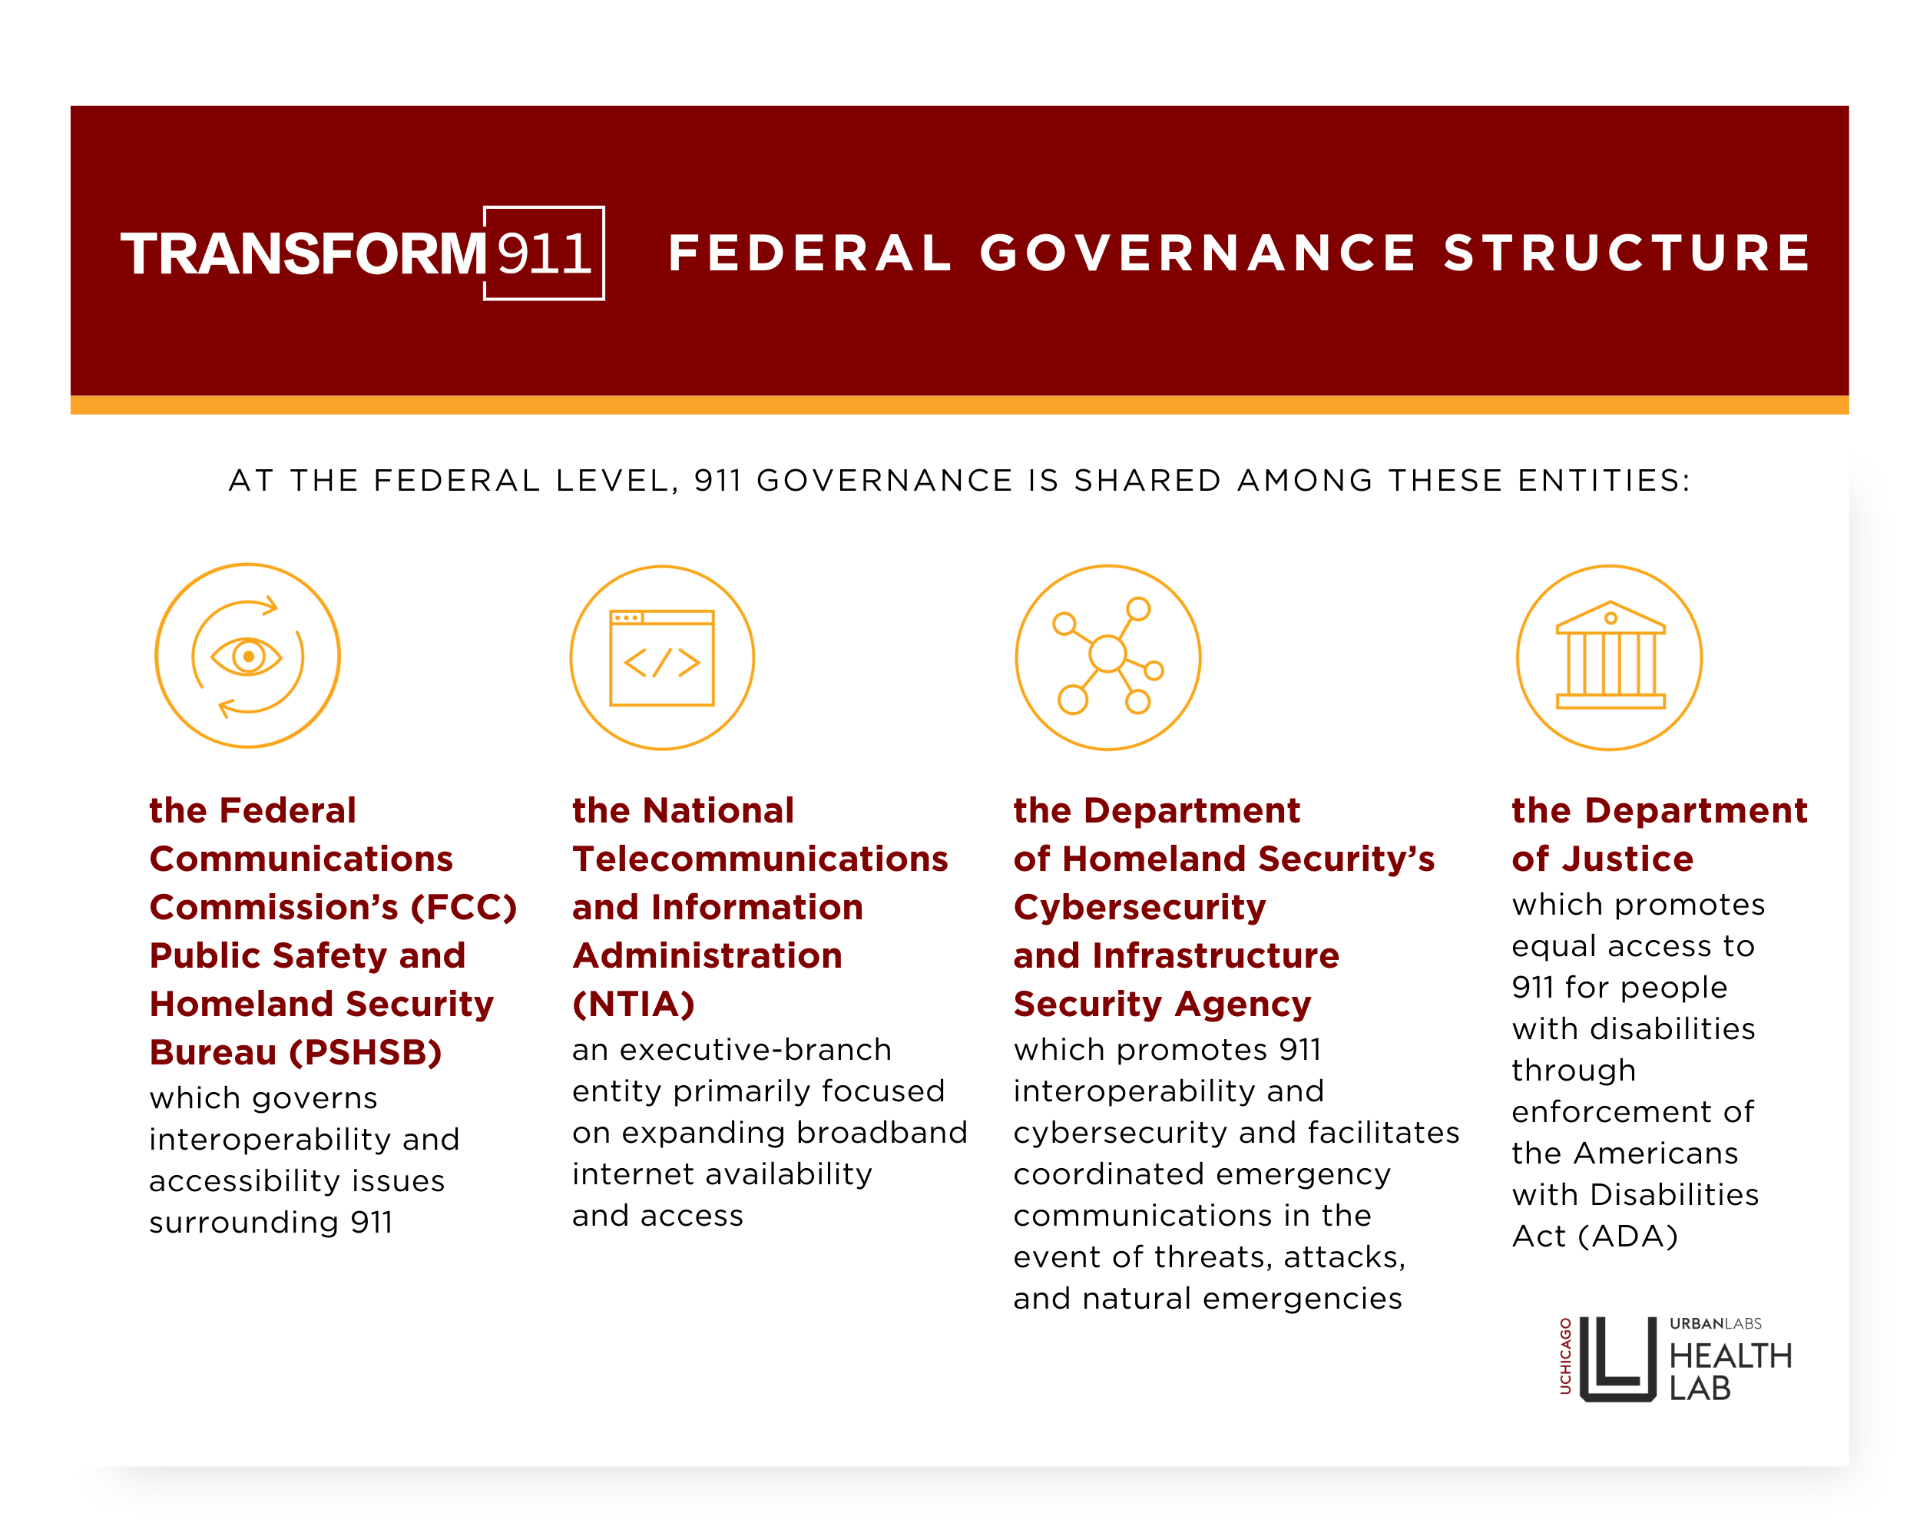 Table illustrating the federal entities that govern 911, as described in the paragraph above.